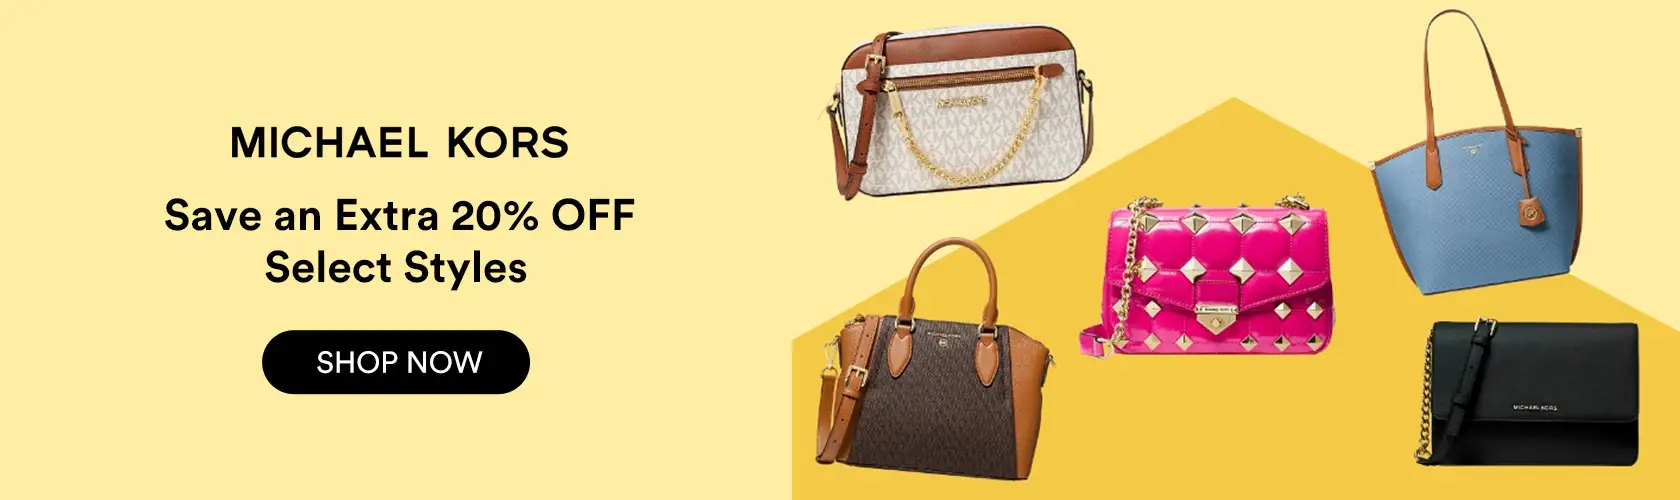 Michael Kors US: Save an Extra 20% OFF Select Styles